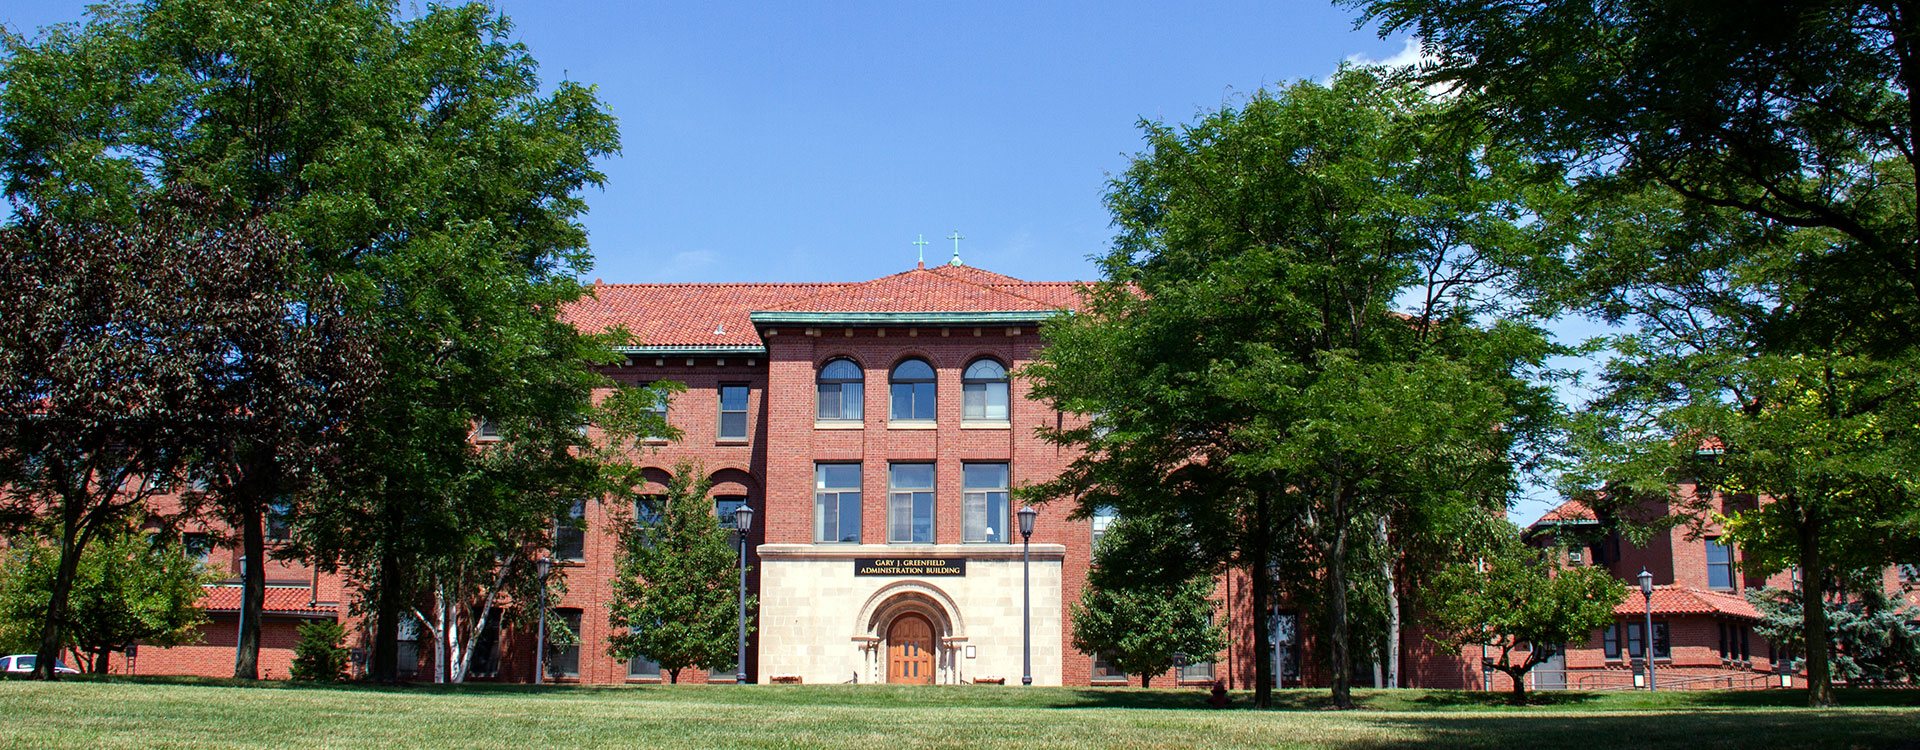 Greenfield Building in summer